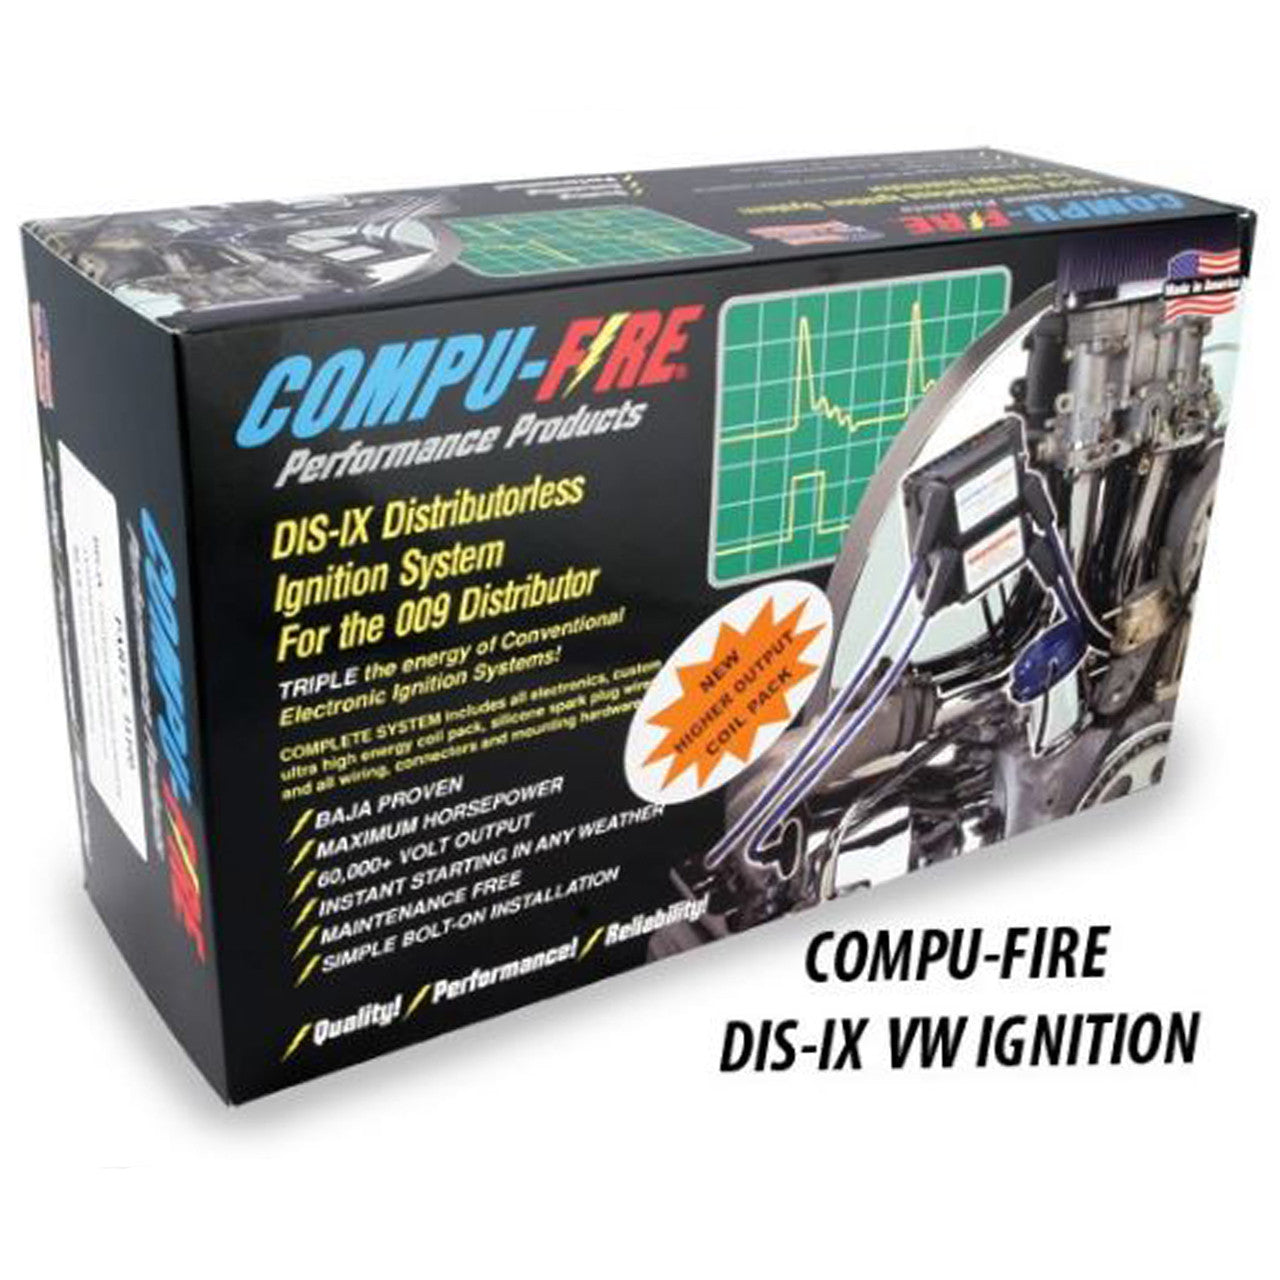 Compufire 11100-Y DIS-IX Vw Ignition System With Yellow Spark Plug Wires